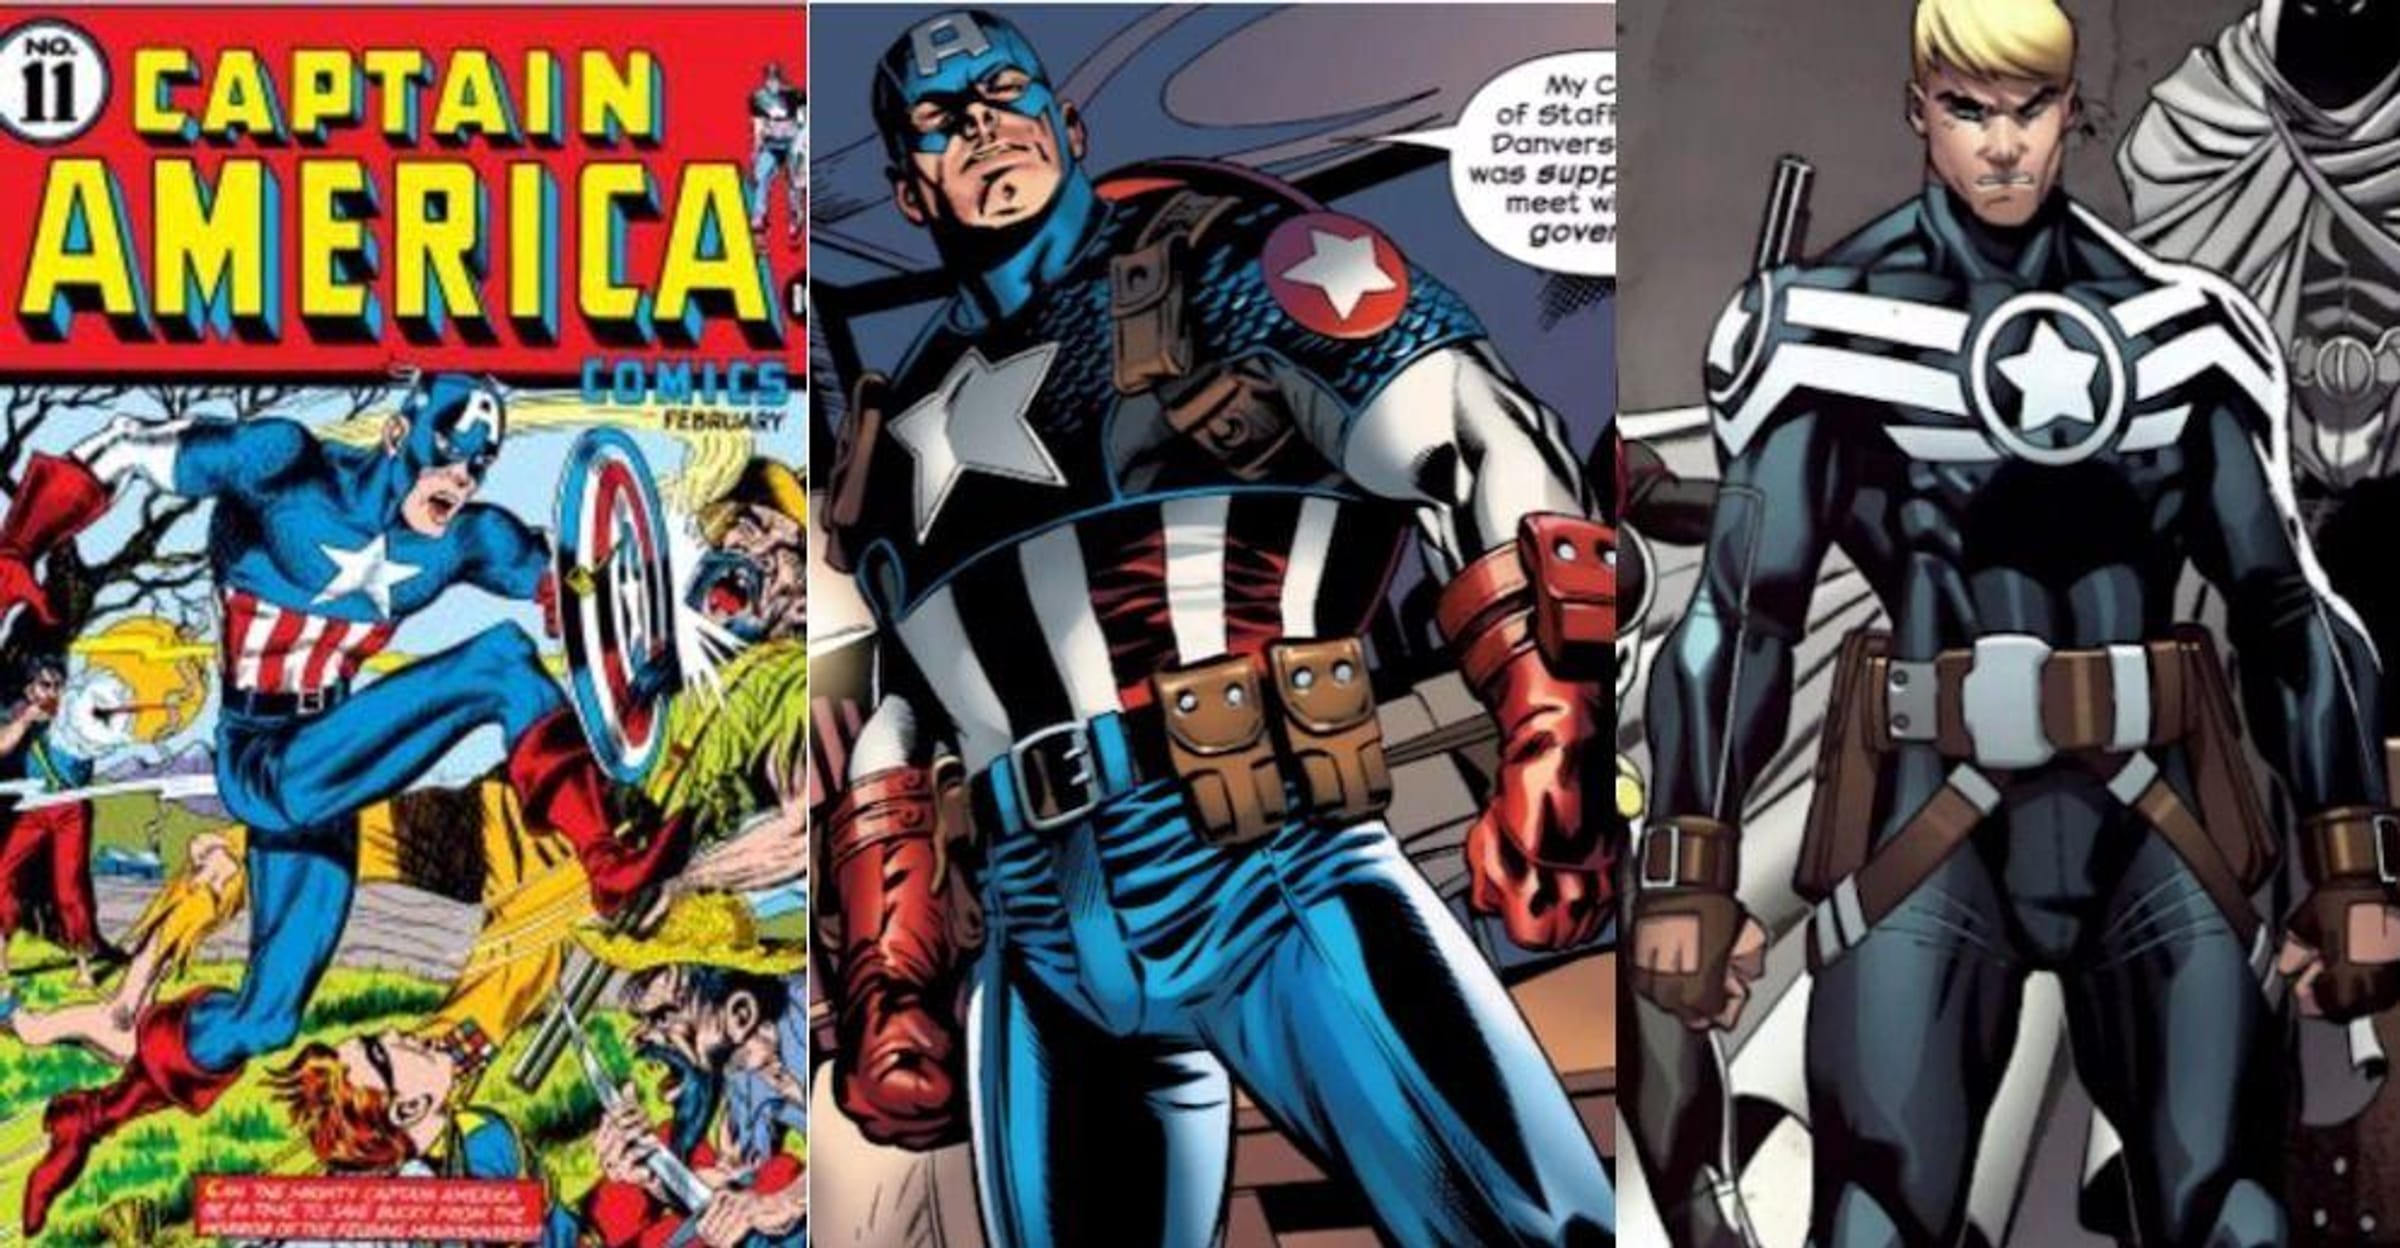 The Visual Evolution Of Captain America Since His Debut in 1941